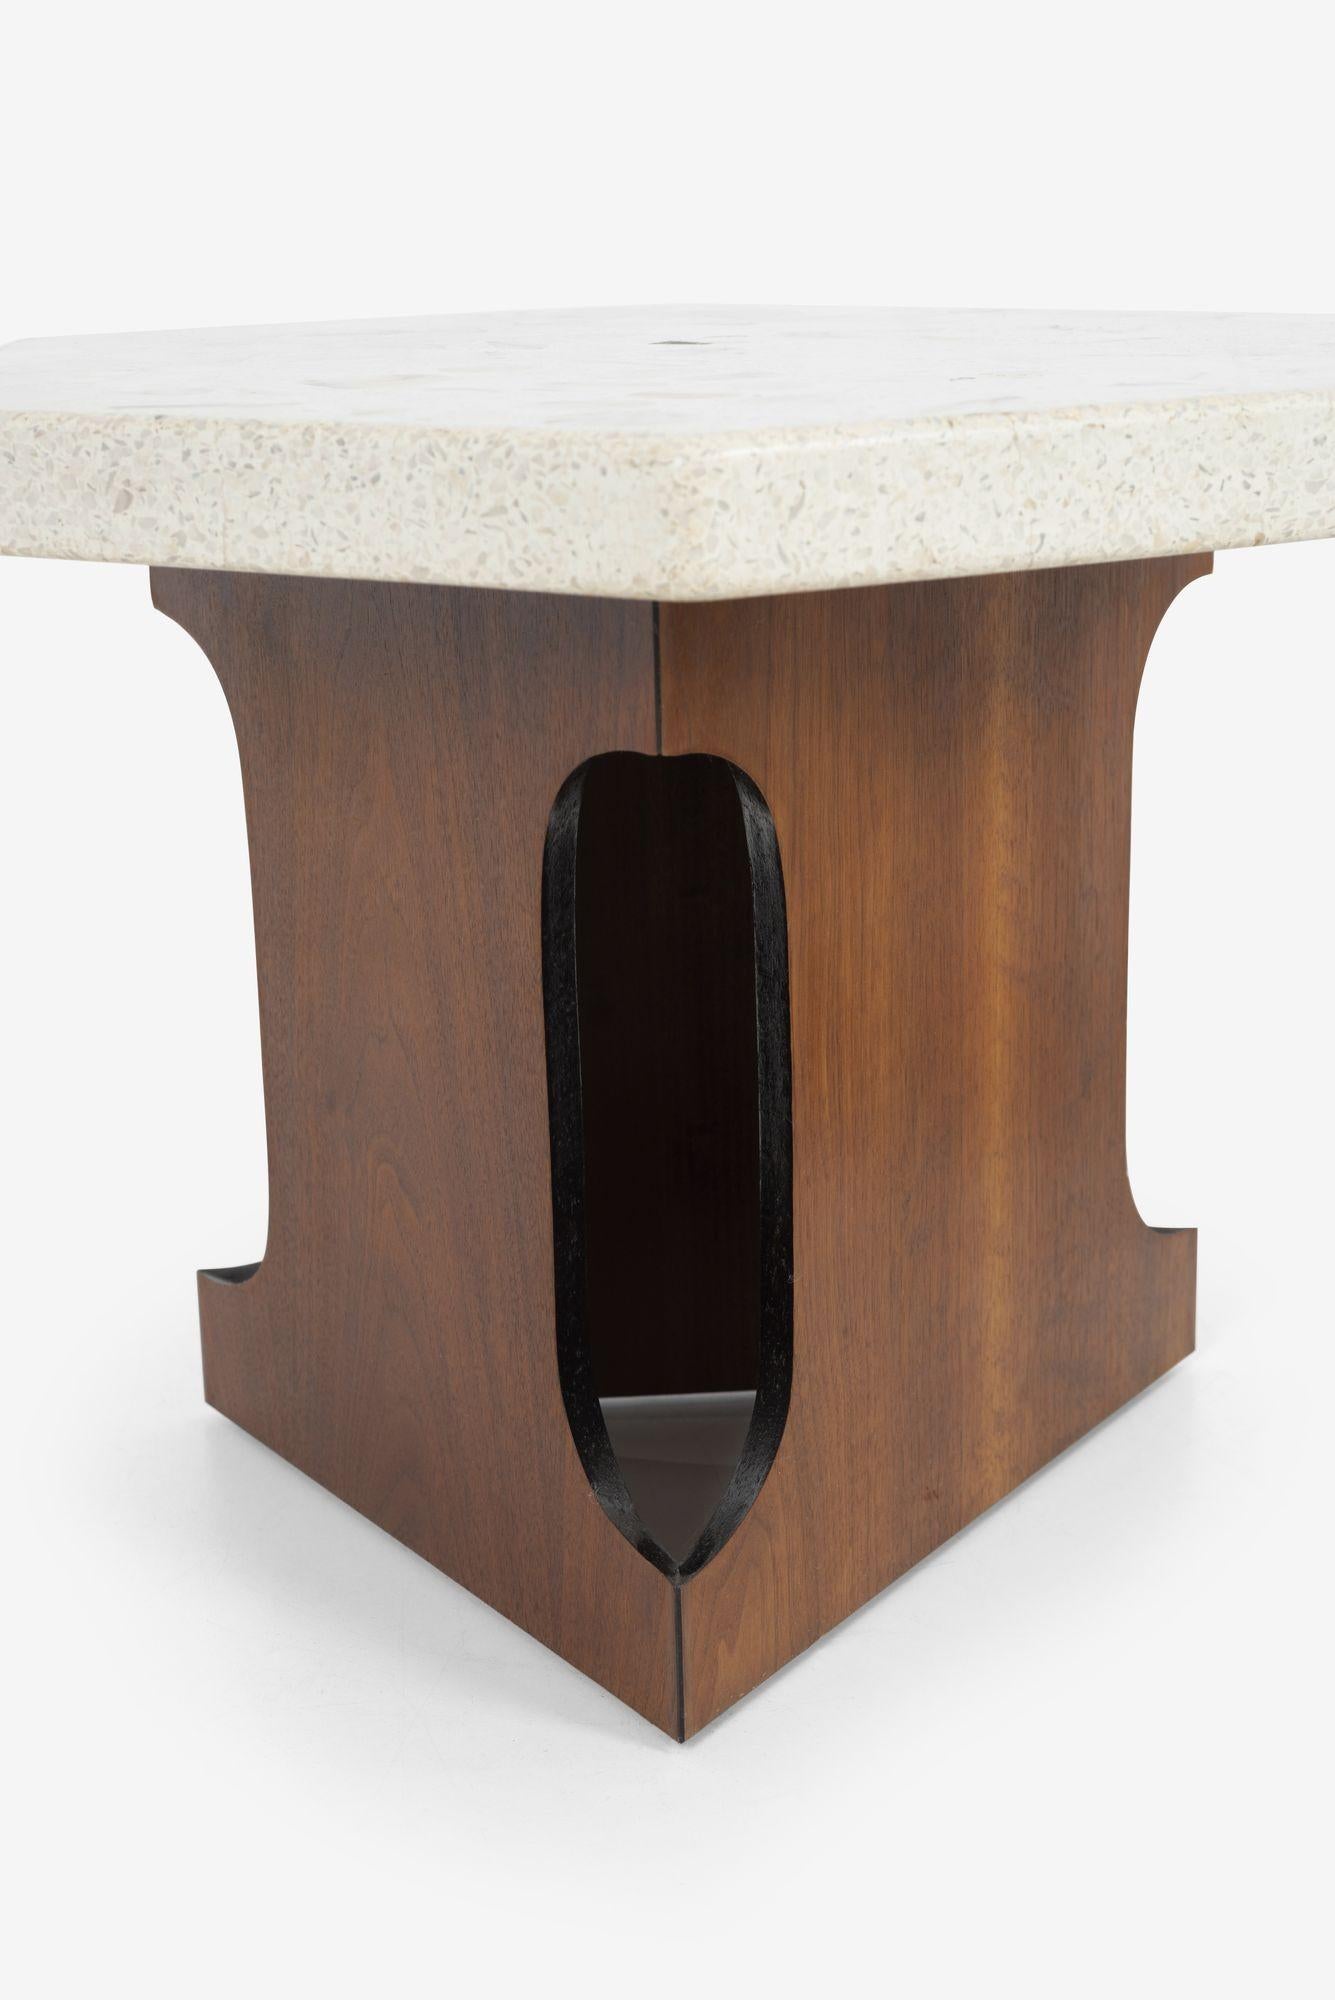 Harvey Probber Style End Tables Hexagonal Terazzo Tops In Good Condition For Sale In Chicago, IL